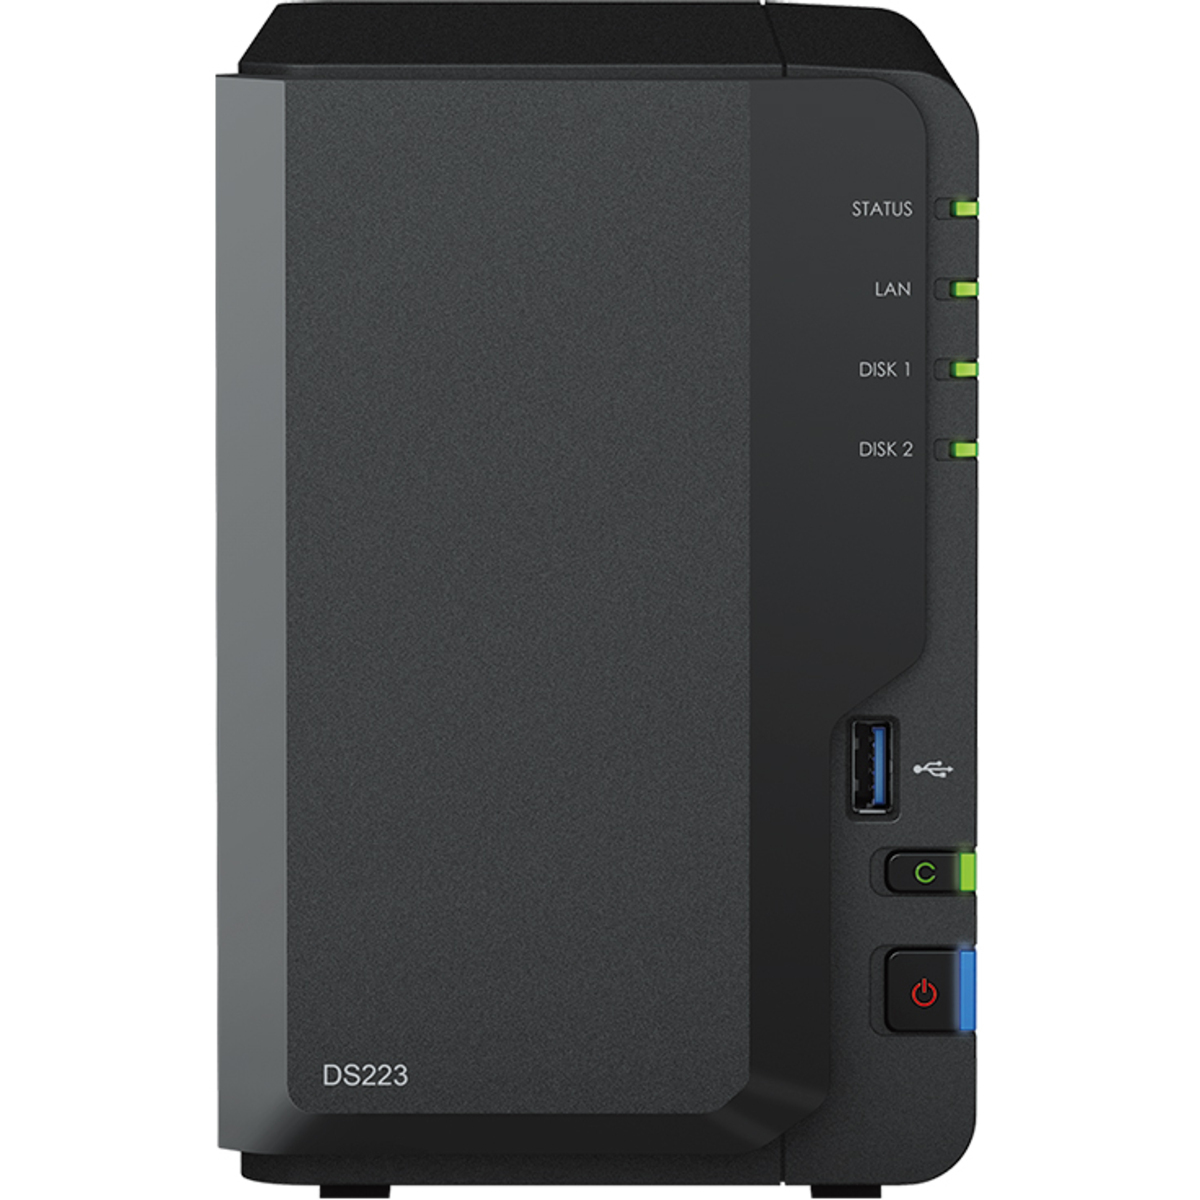 Synology DiskStation DS223 16tb 2-Bay Desktop Personal / Basic Home / Small Office NAS - Network Attached Storage Device 1x16tb Western Digital Gold WD161KRYZ 3.5 7200rpm SATA 6Gb/s HDD ENTERPRISE Class Drives Installed - Burn-In Tested DiskStation DS223